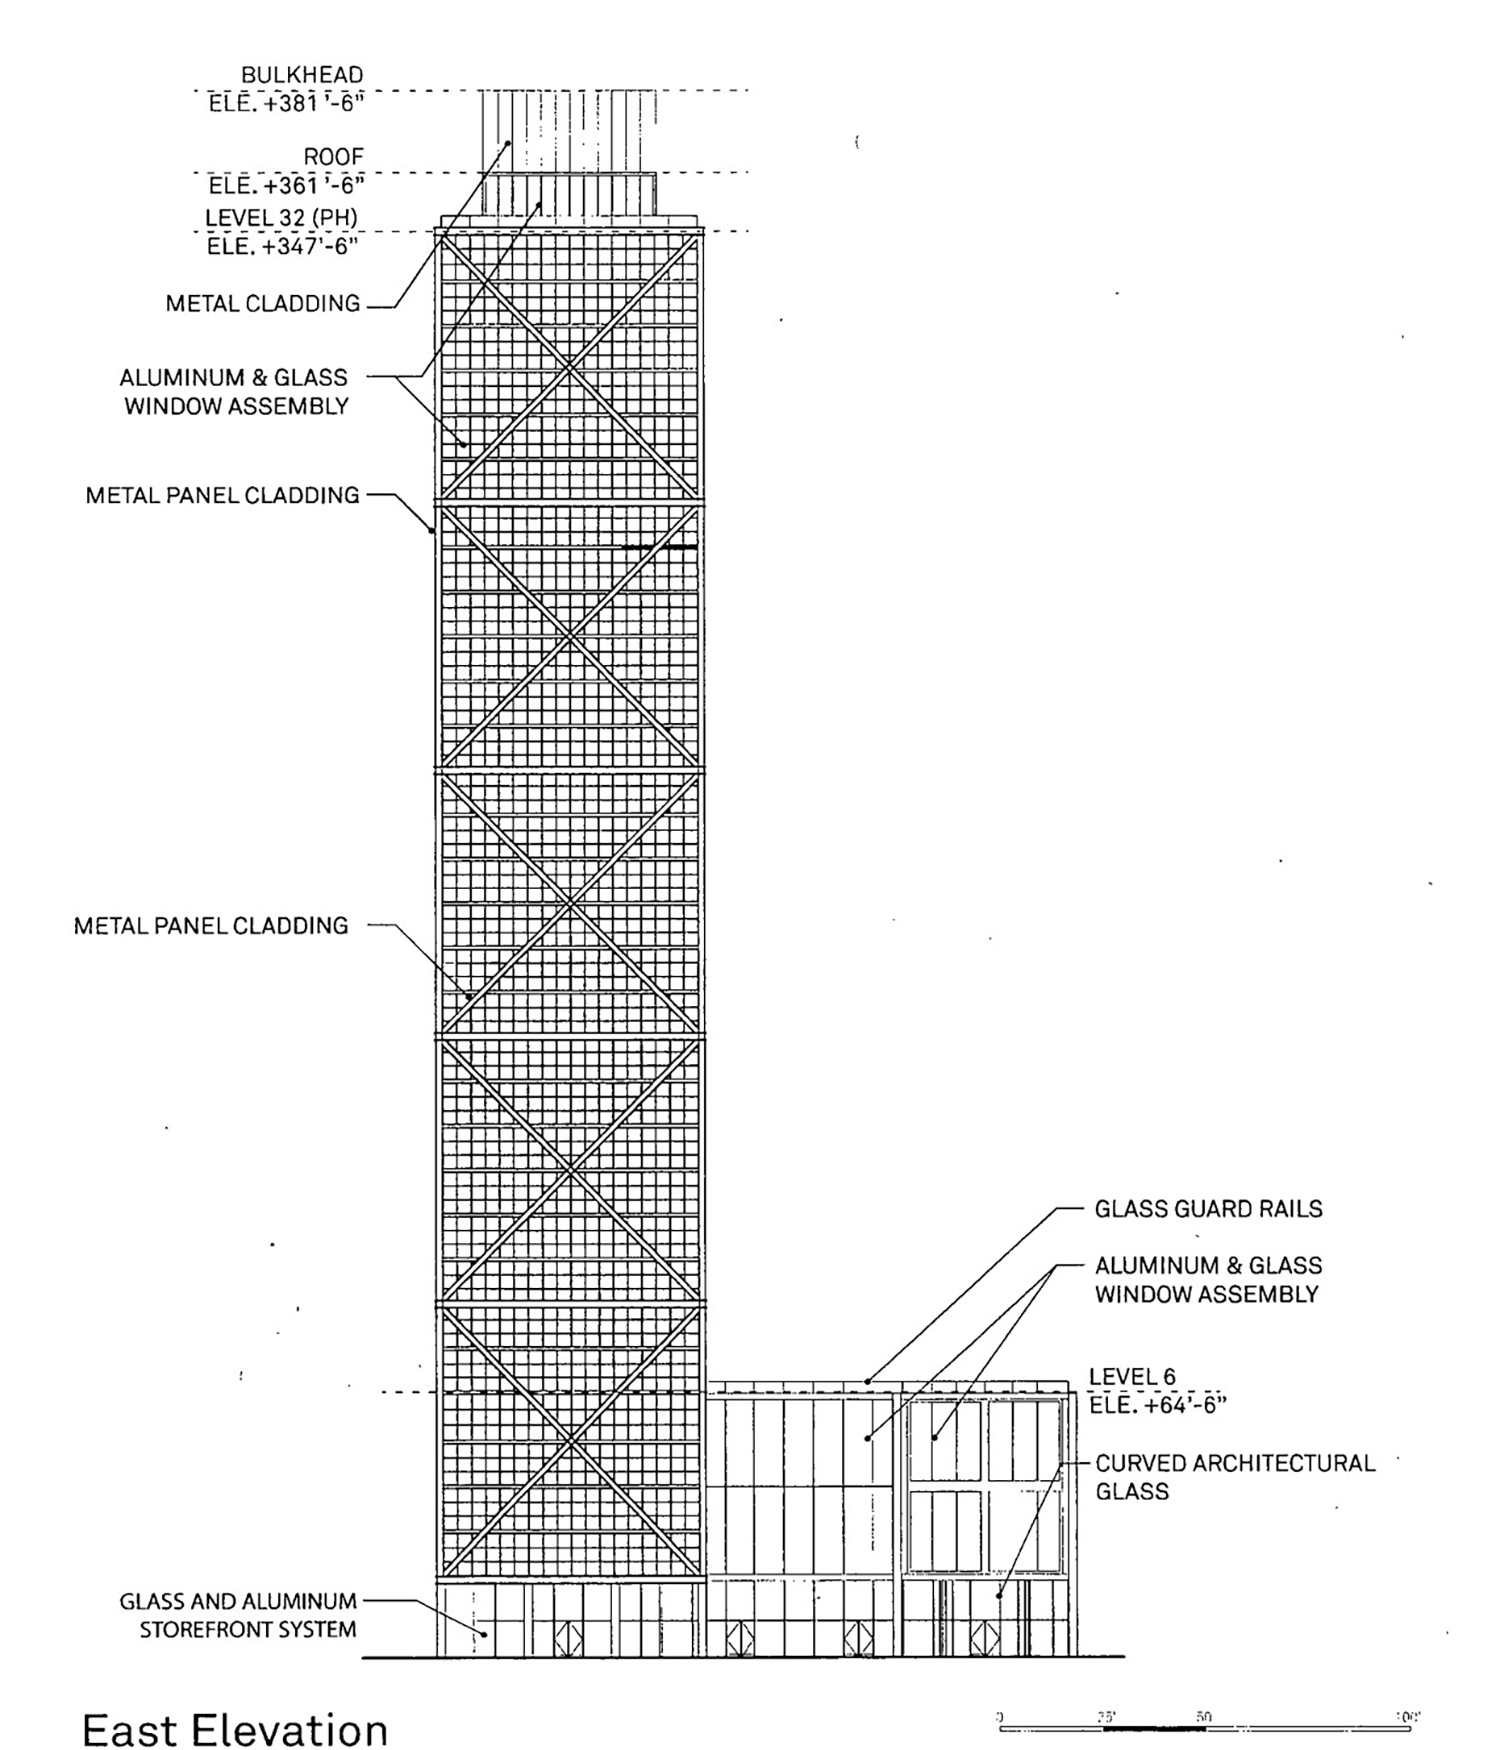 East Elevation for 1201 W Fulton Market. Drawing by Morris Adjmi Architects